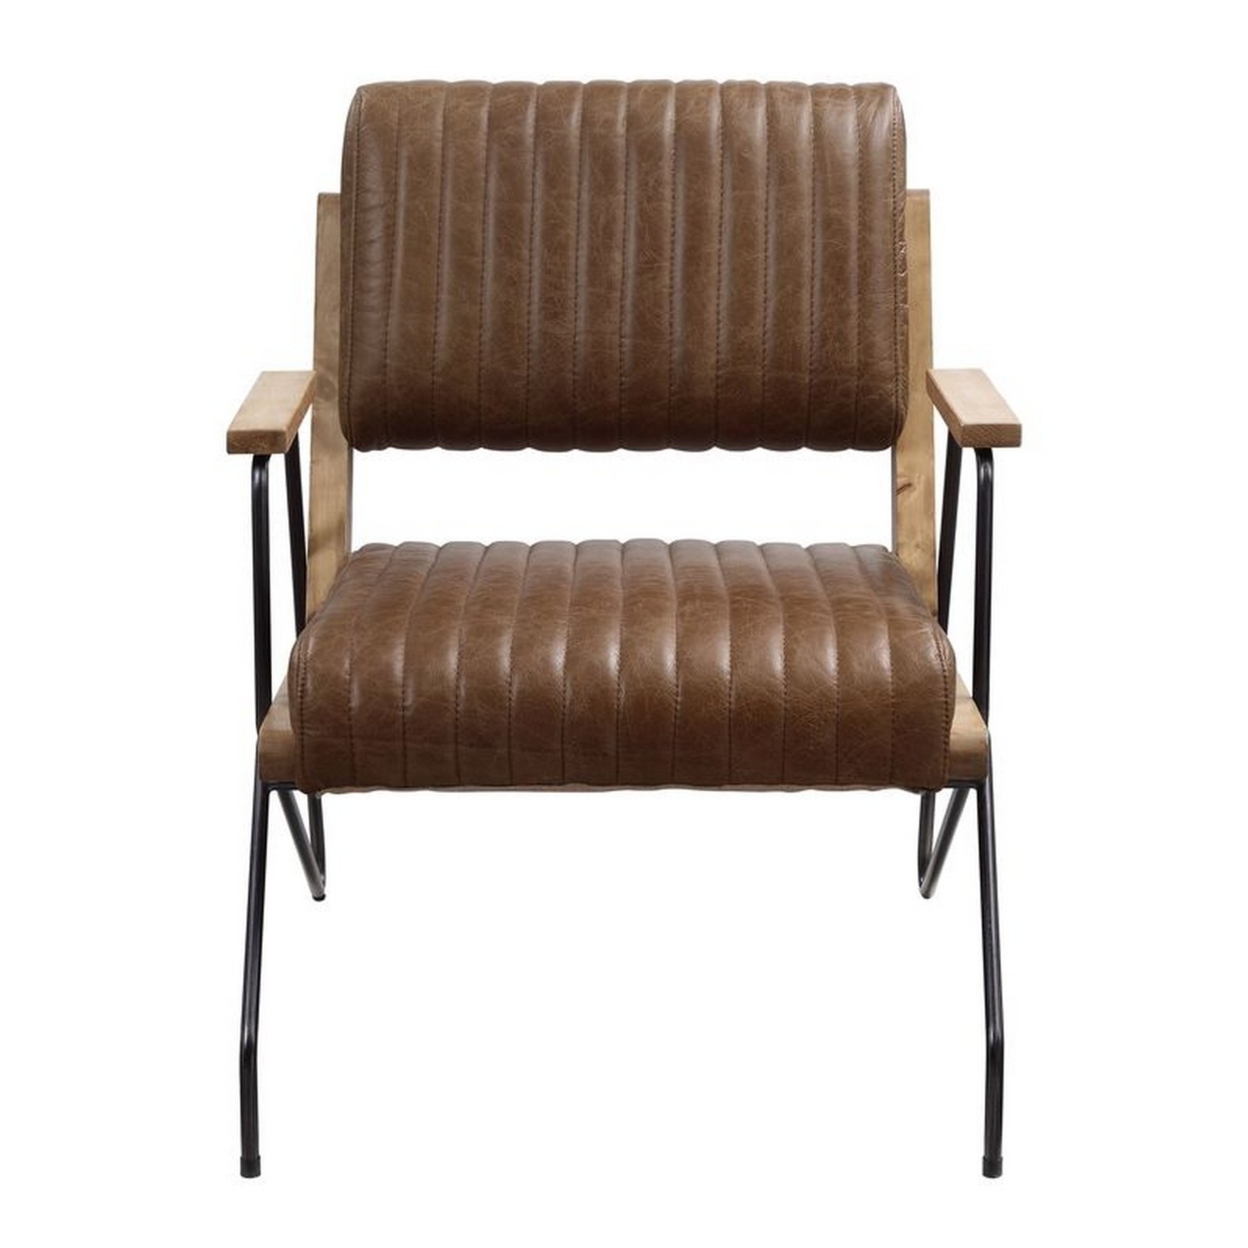 Accent Chair With Leatherette Seat And Channel Stitch, Brown- Saltoro Sherpi